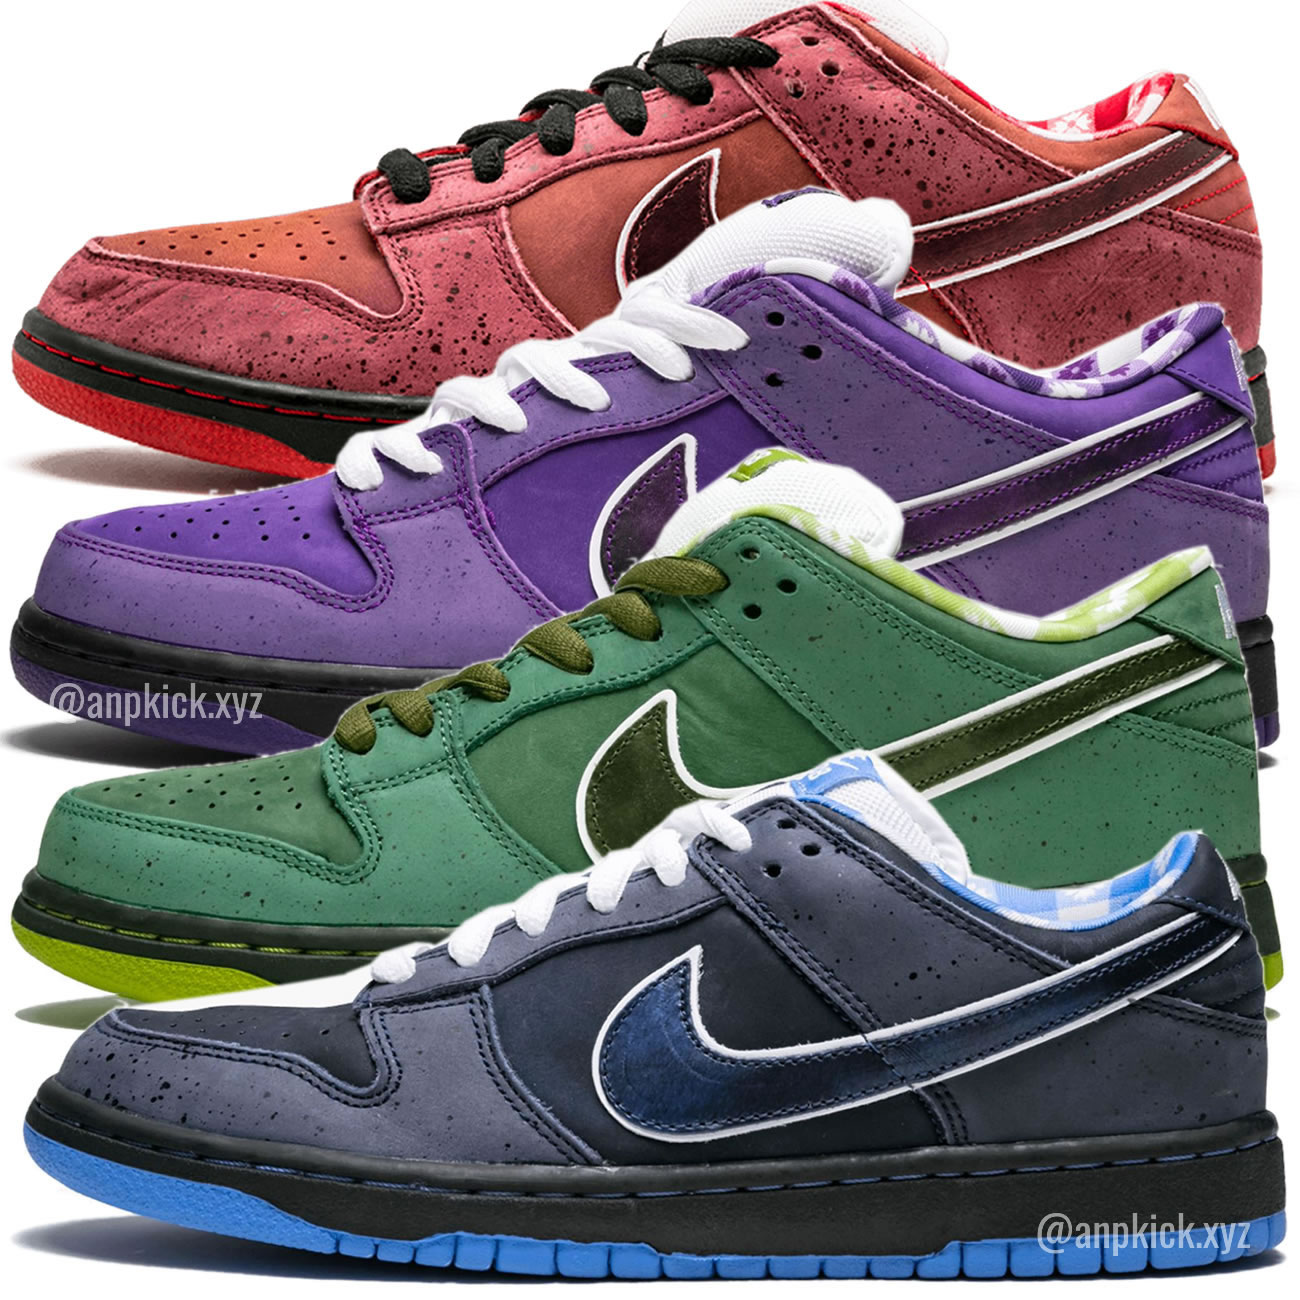 Anpkick Nike Sb Dunk Low Concepts Blue Green Purple Red Lobster 4 Colors (1) - newkick.org